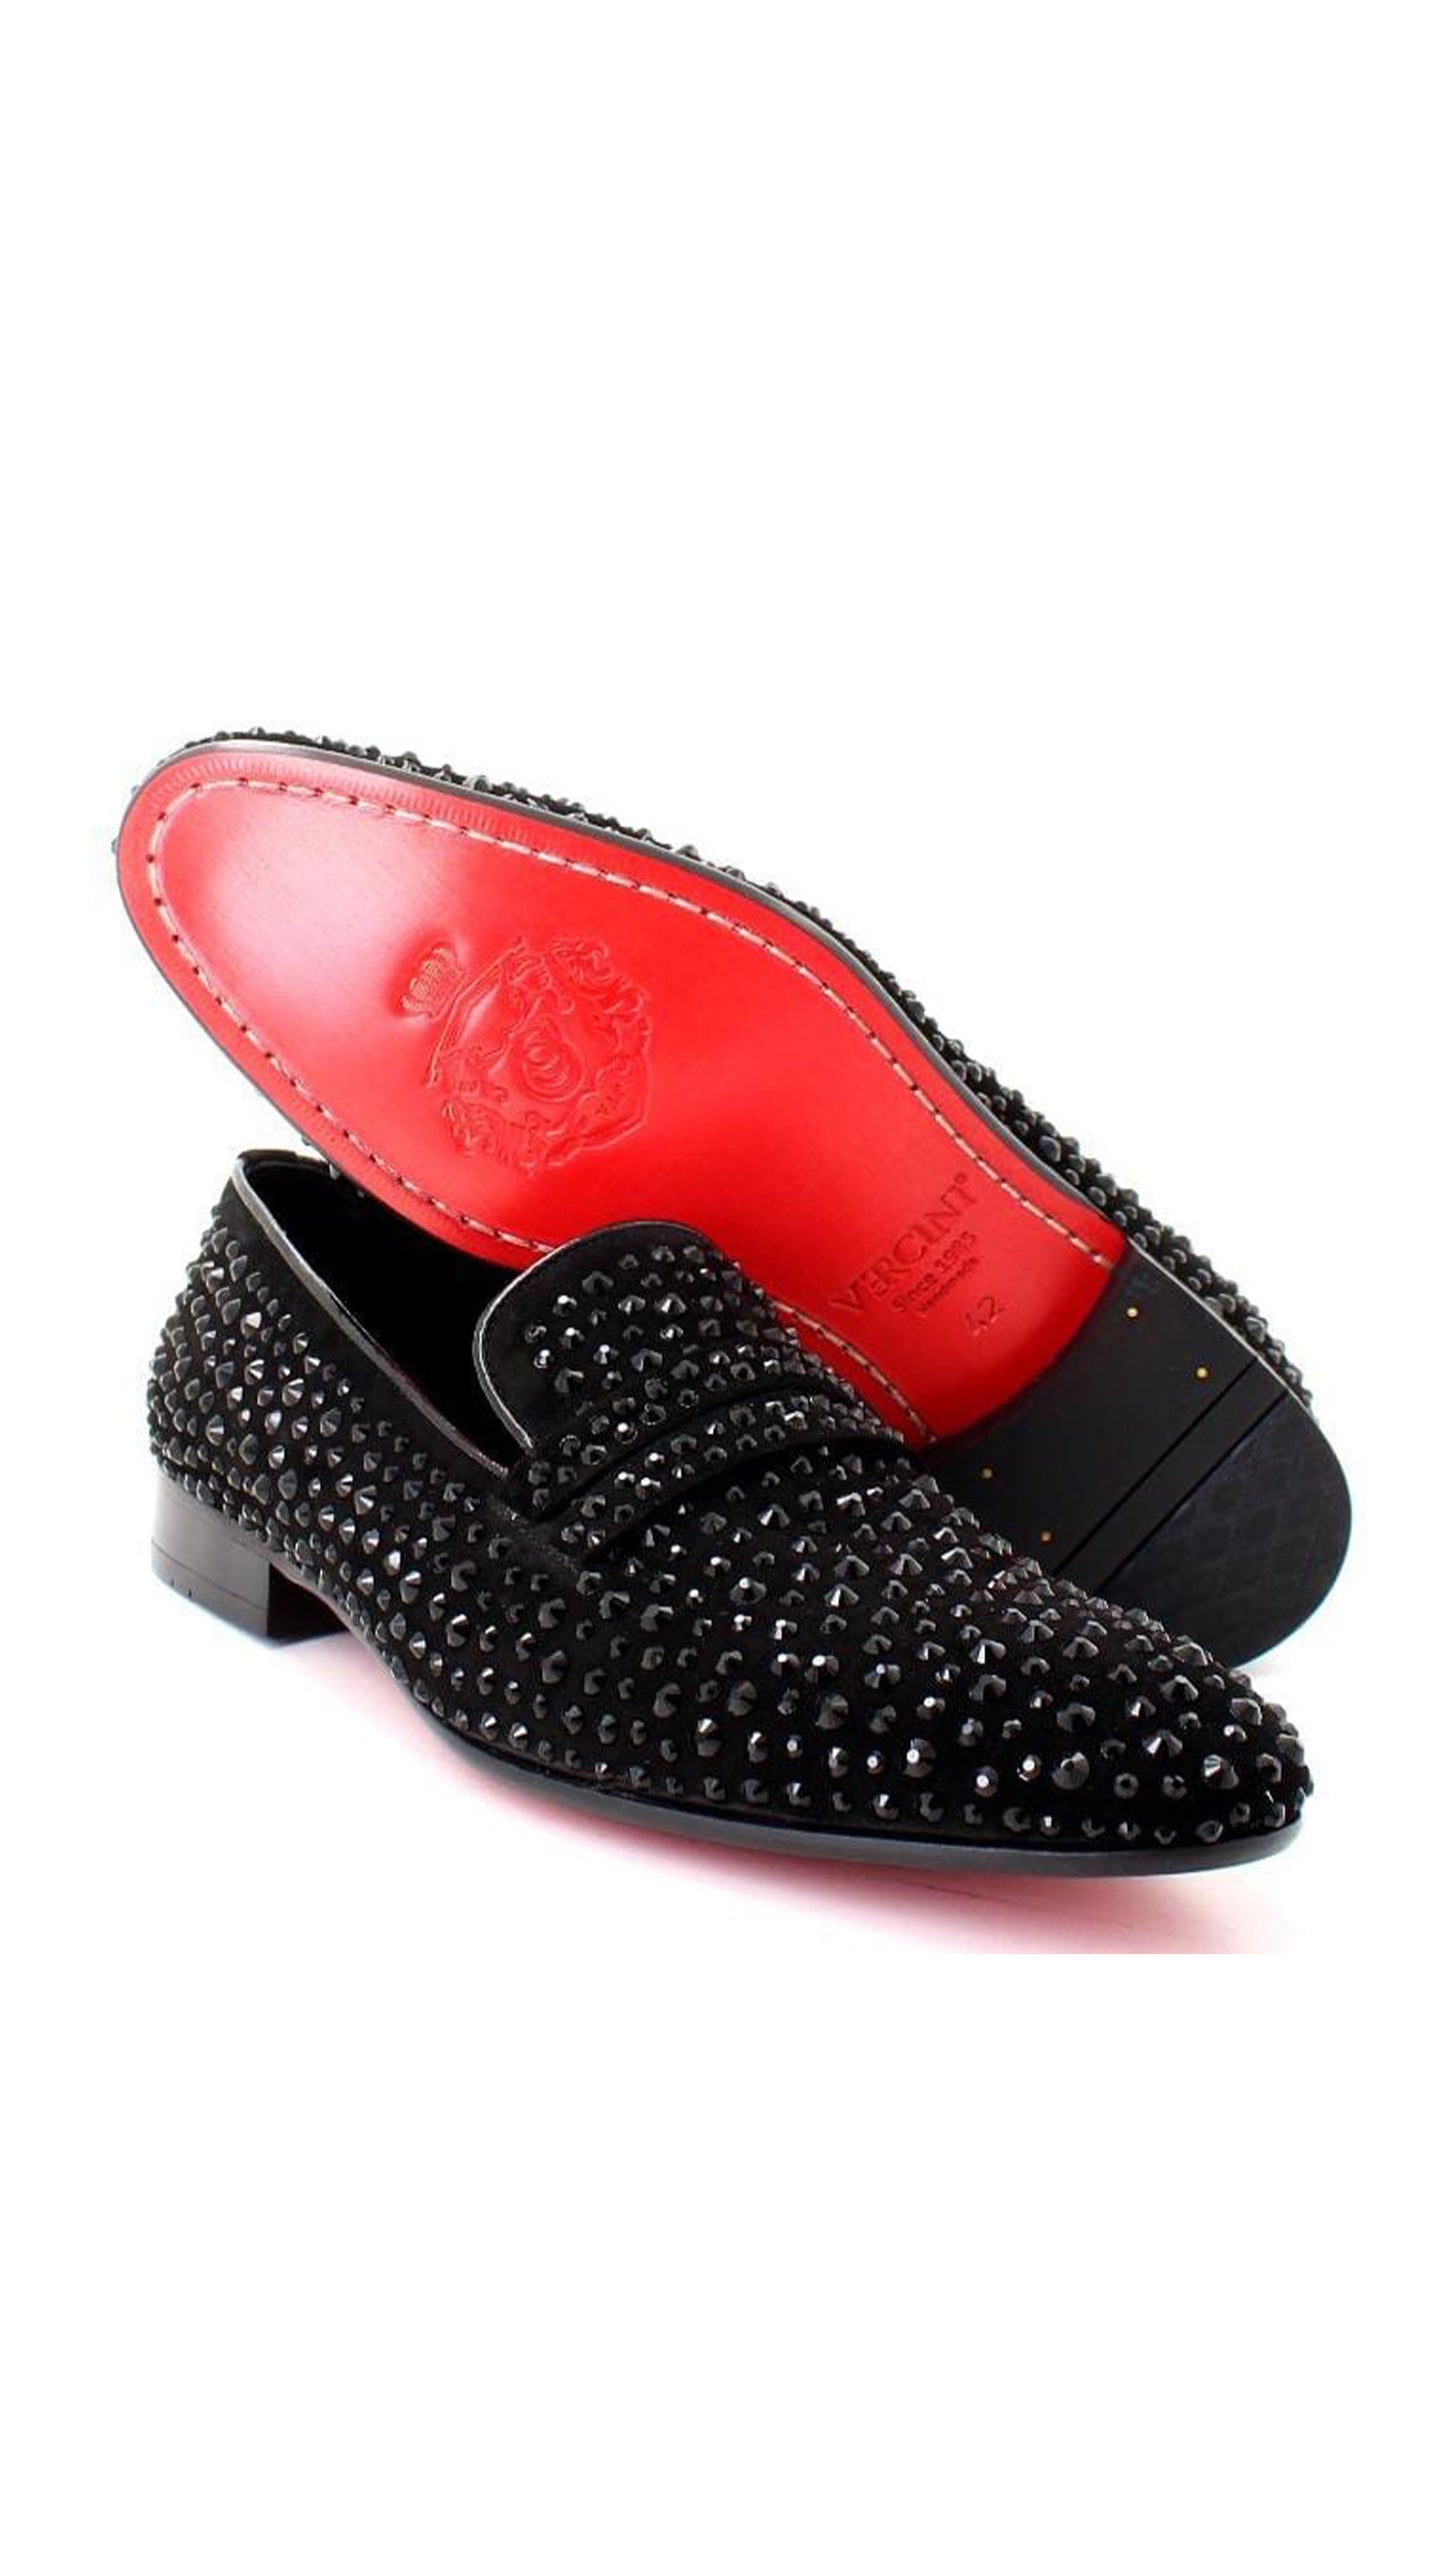 Vercini Luxe Studded Leather Loafers